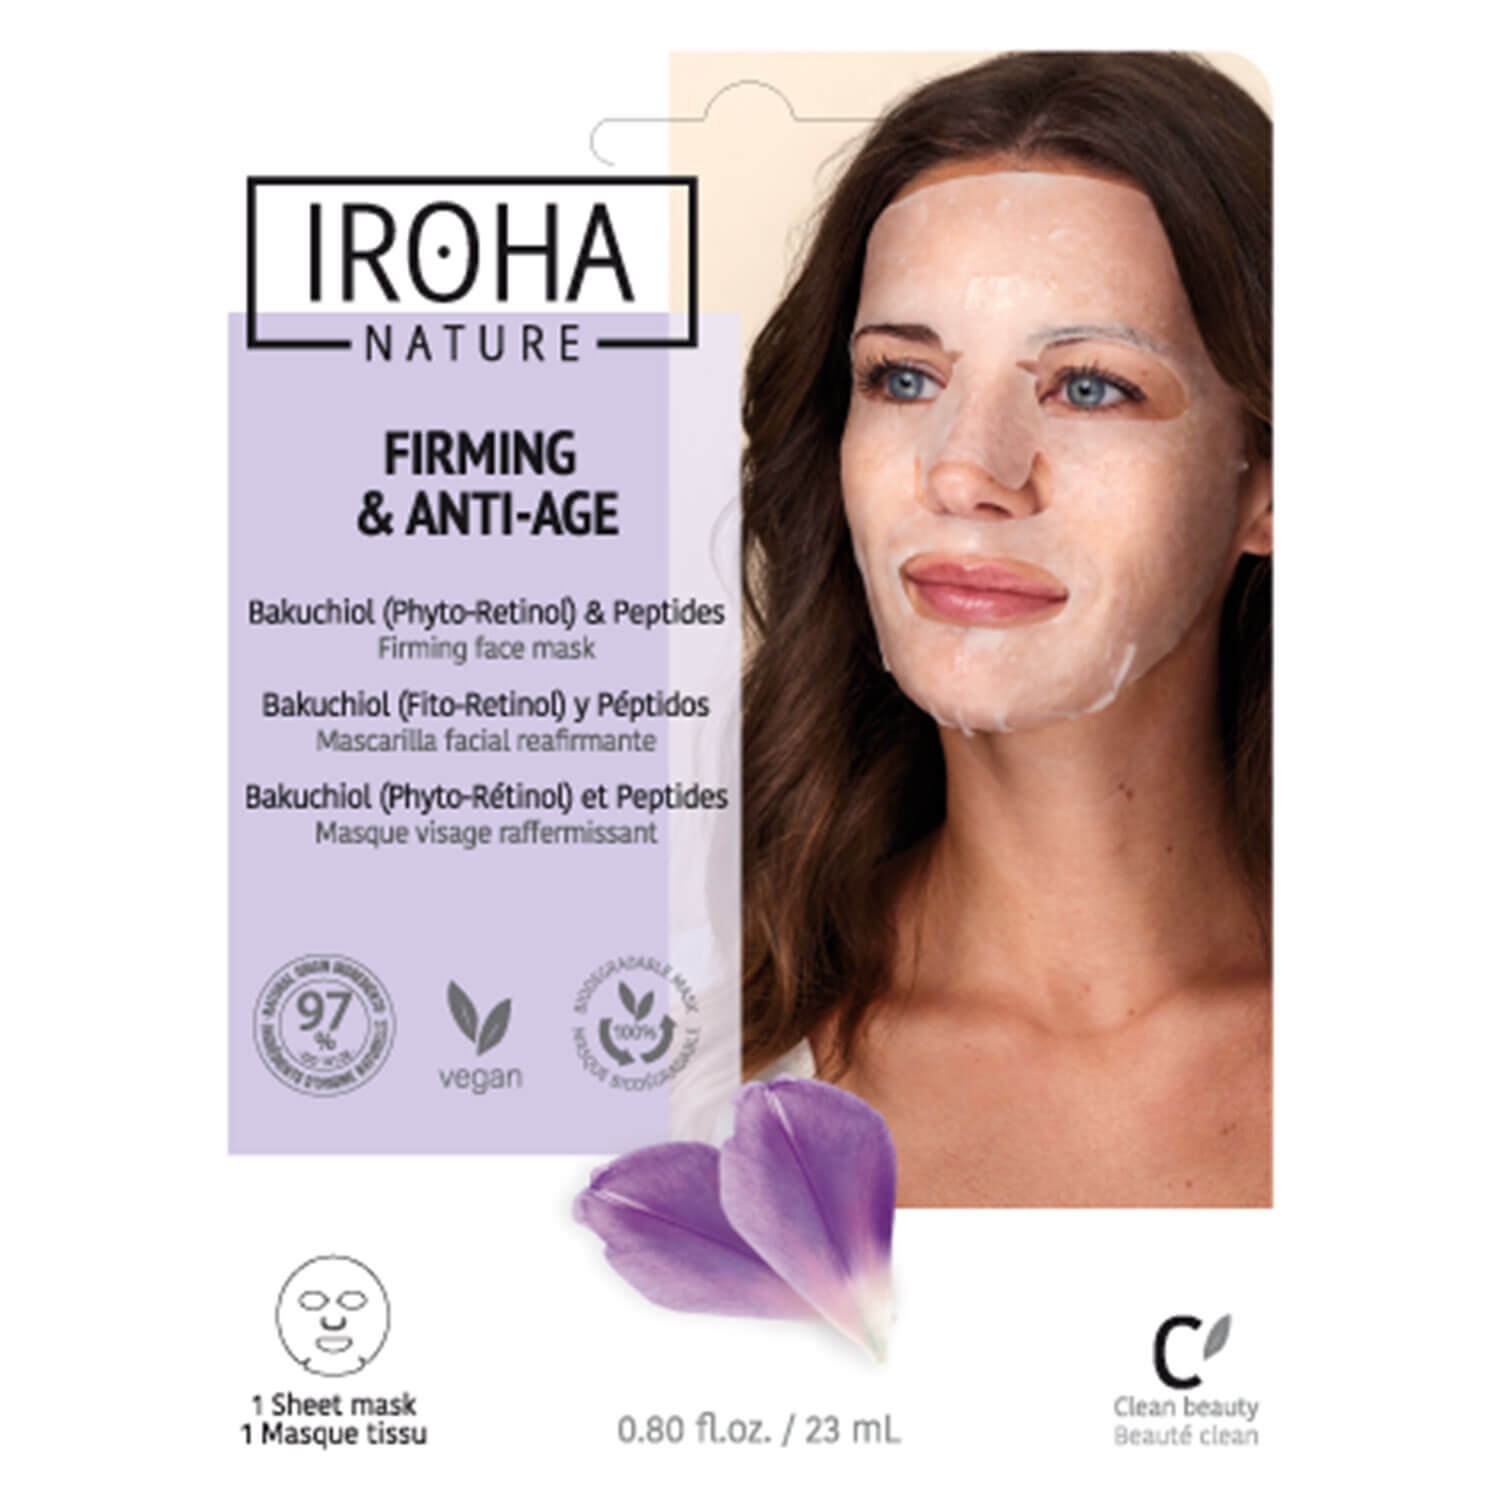 Product image from Iroha Nature - Firming & Anti-Age Bakuchiol & Peptides Face Mask